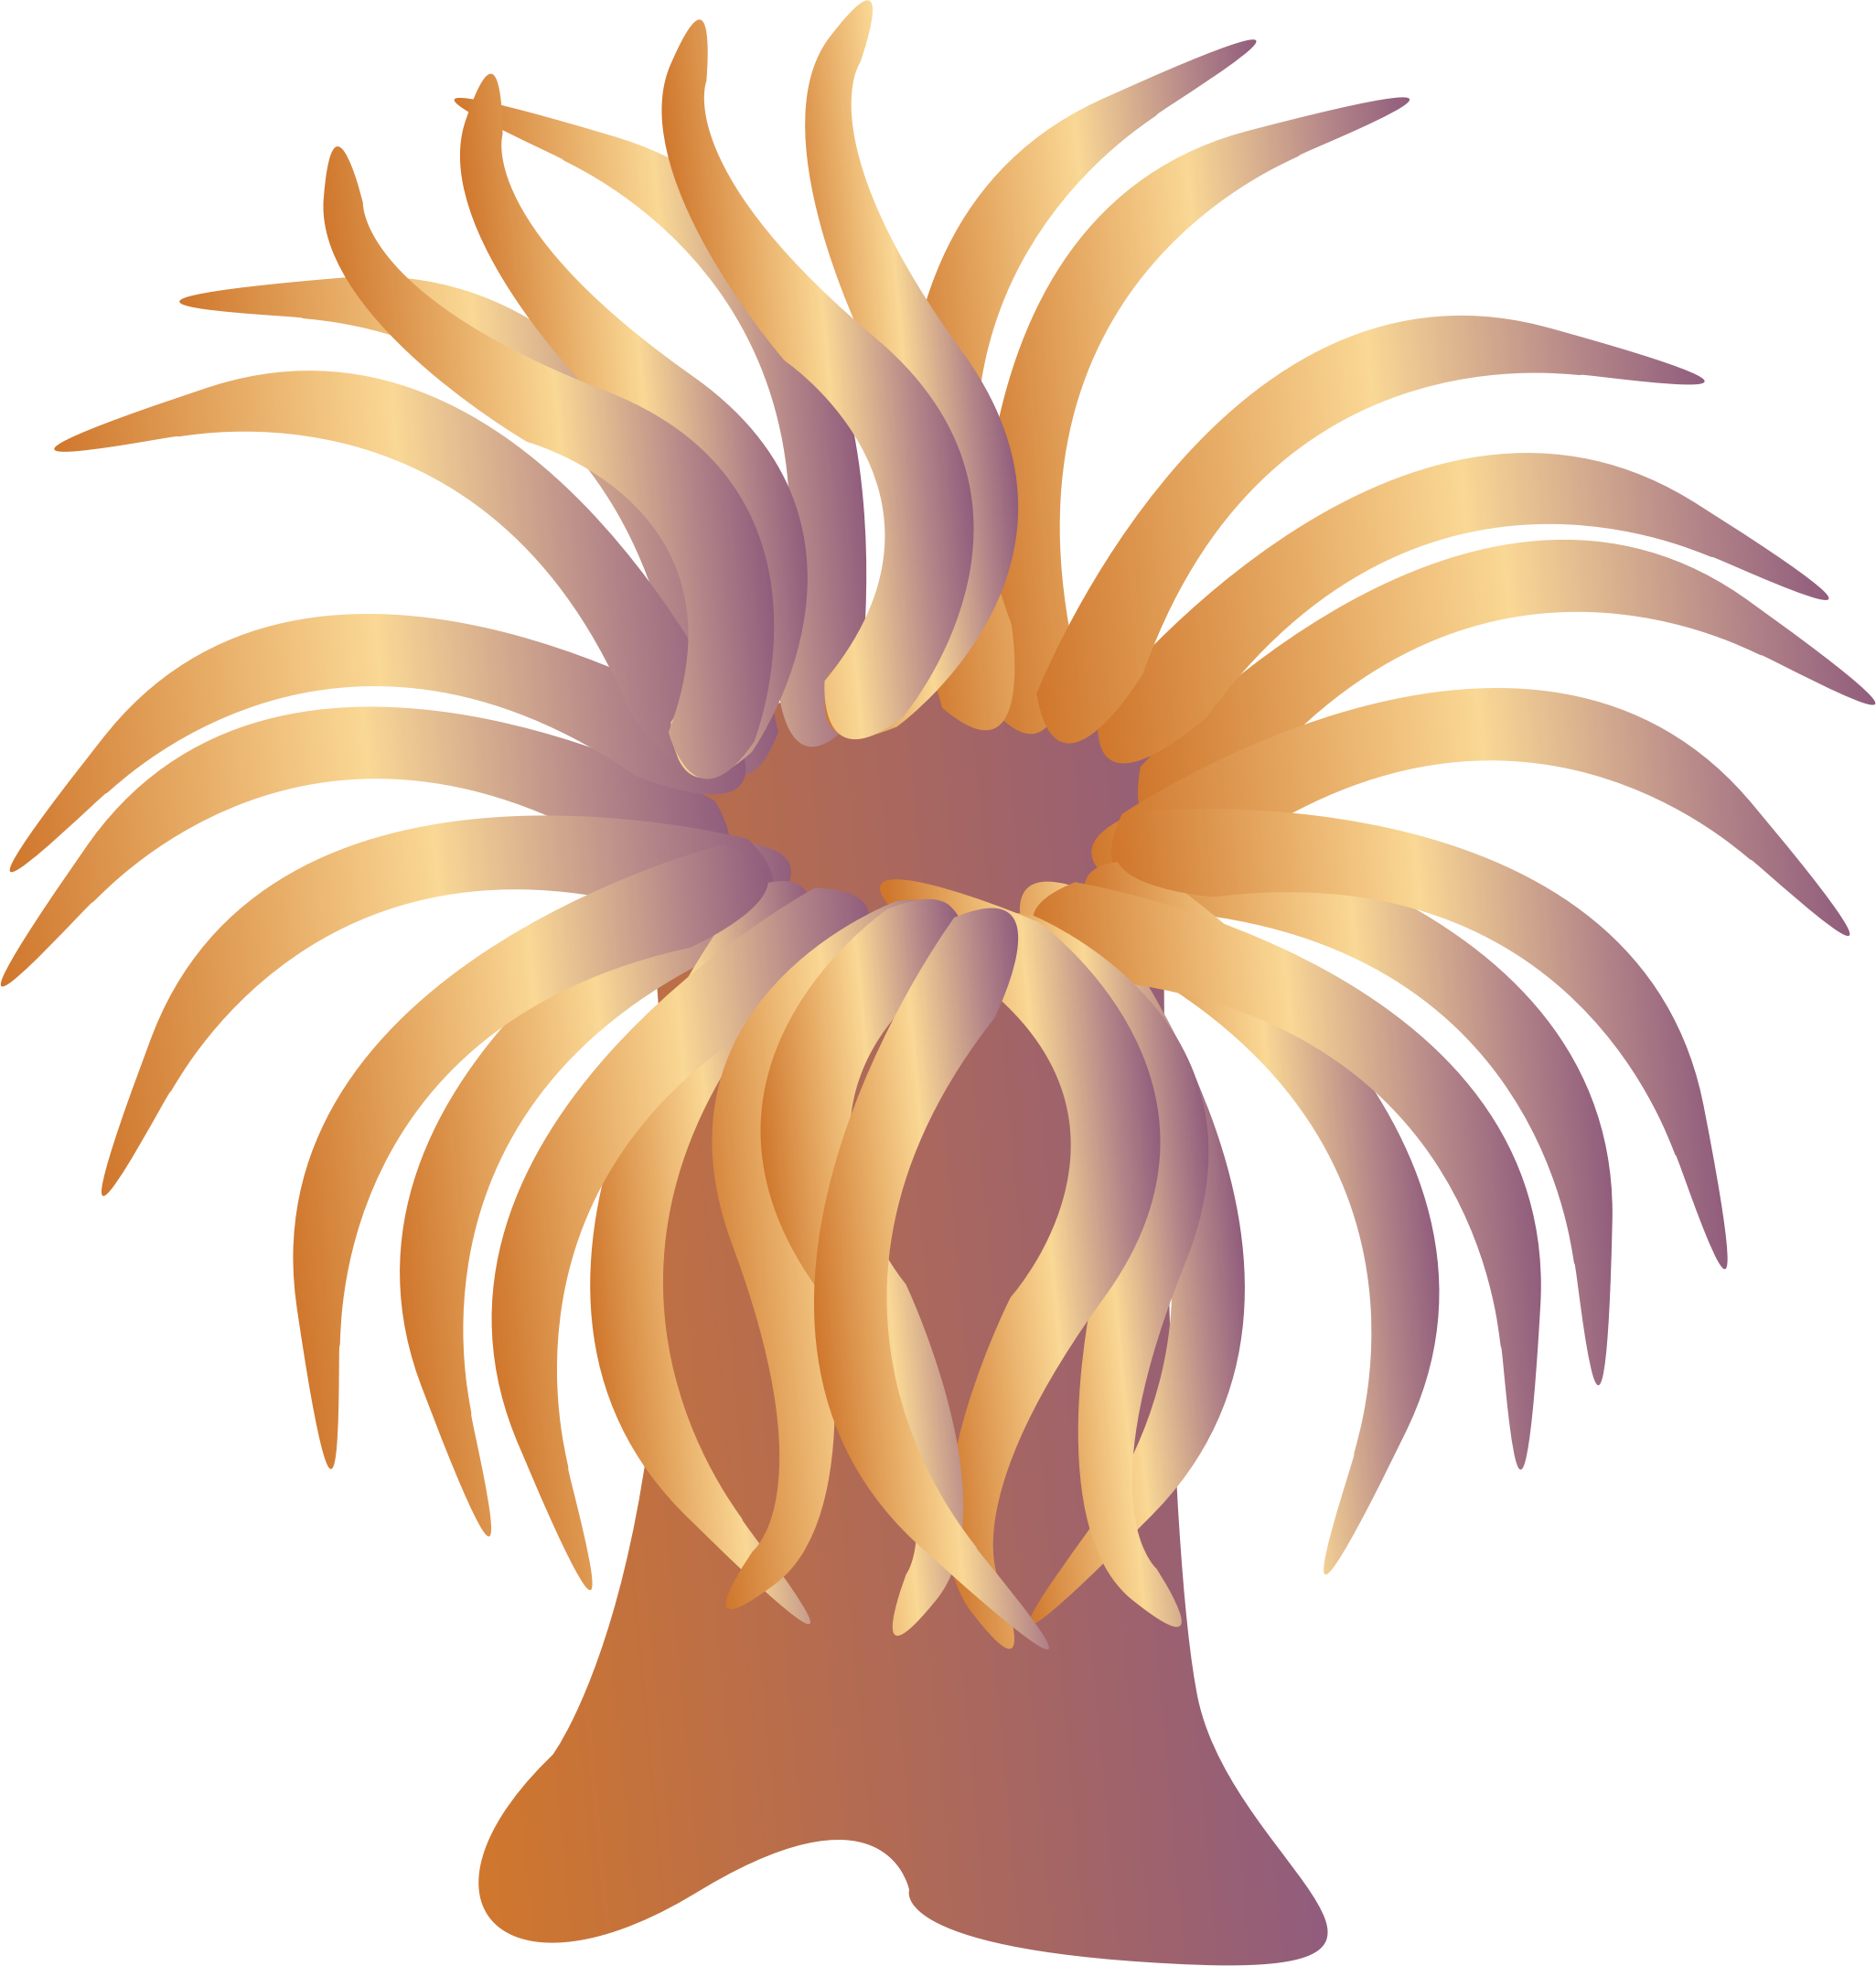 Sea Anemone clipart #15, Download drawings